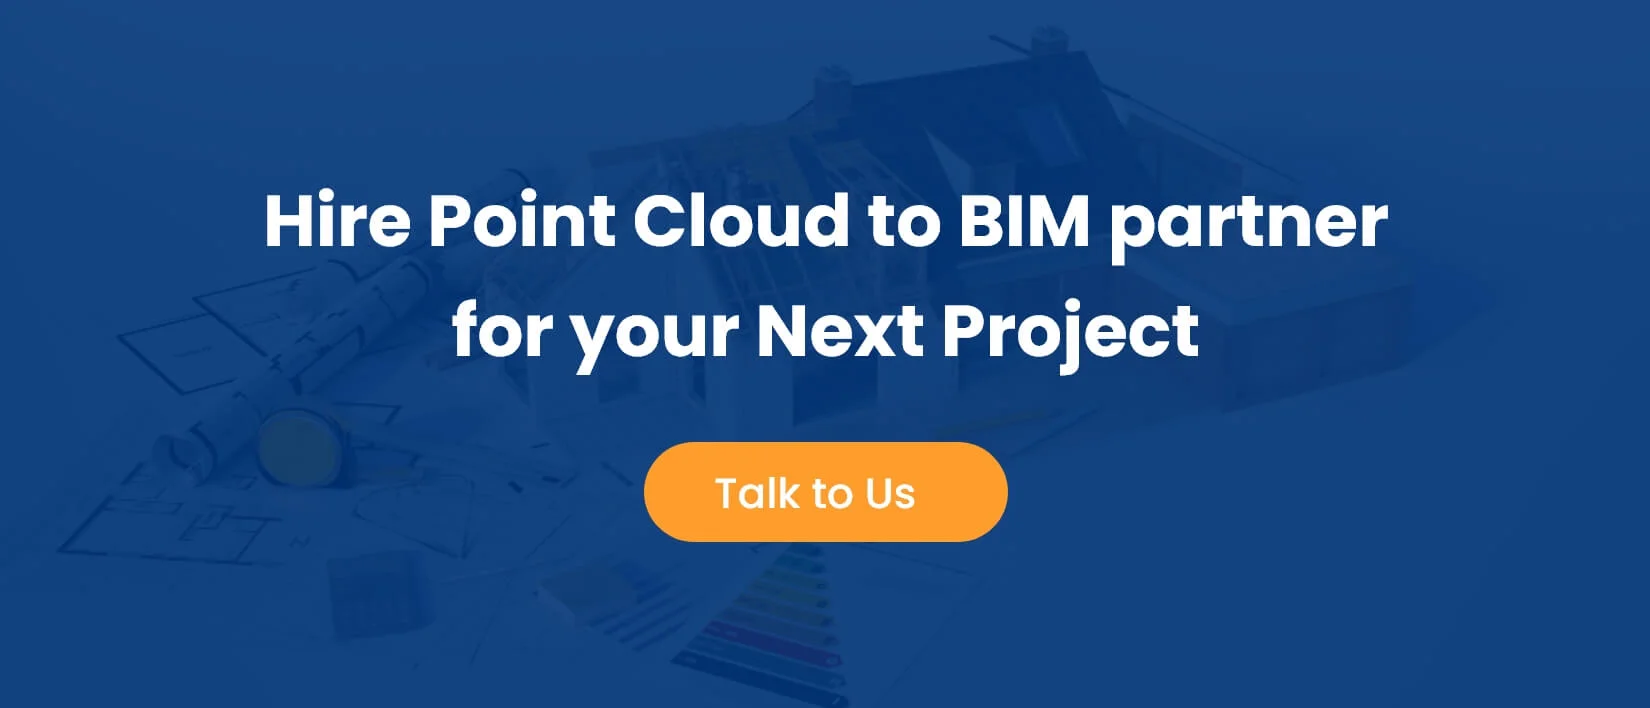 Hire Point Cloud to BIM partner for your Next Project